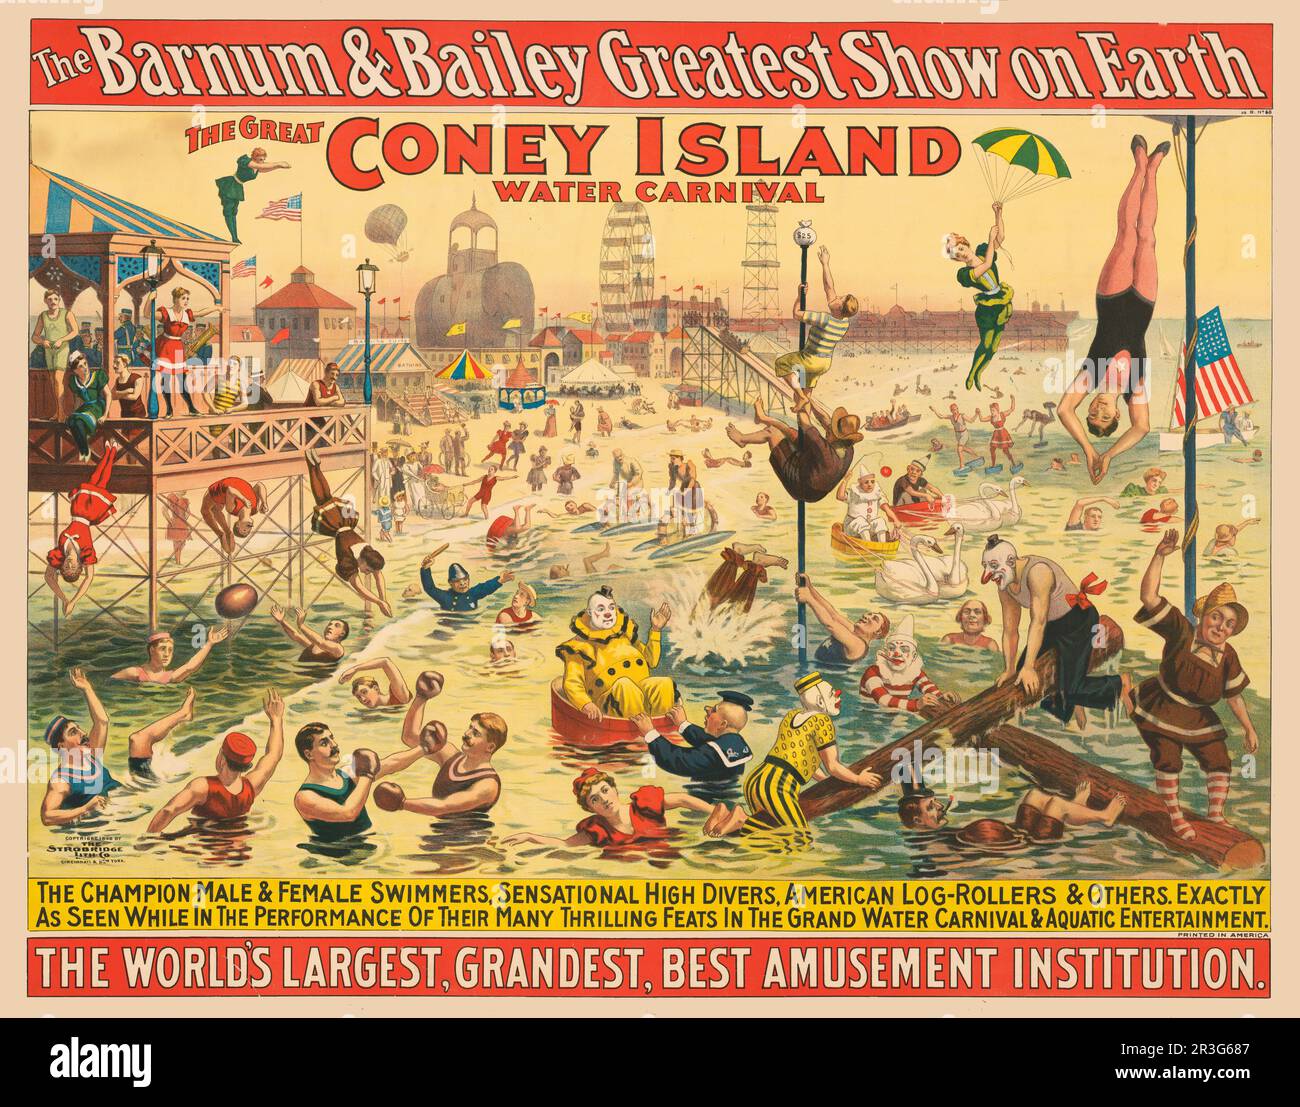 Vintage Barnum & Bailey circus poster showing people in costumes performing at the beach, circa 1898. Stock Photo